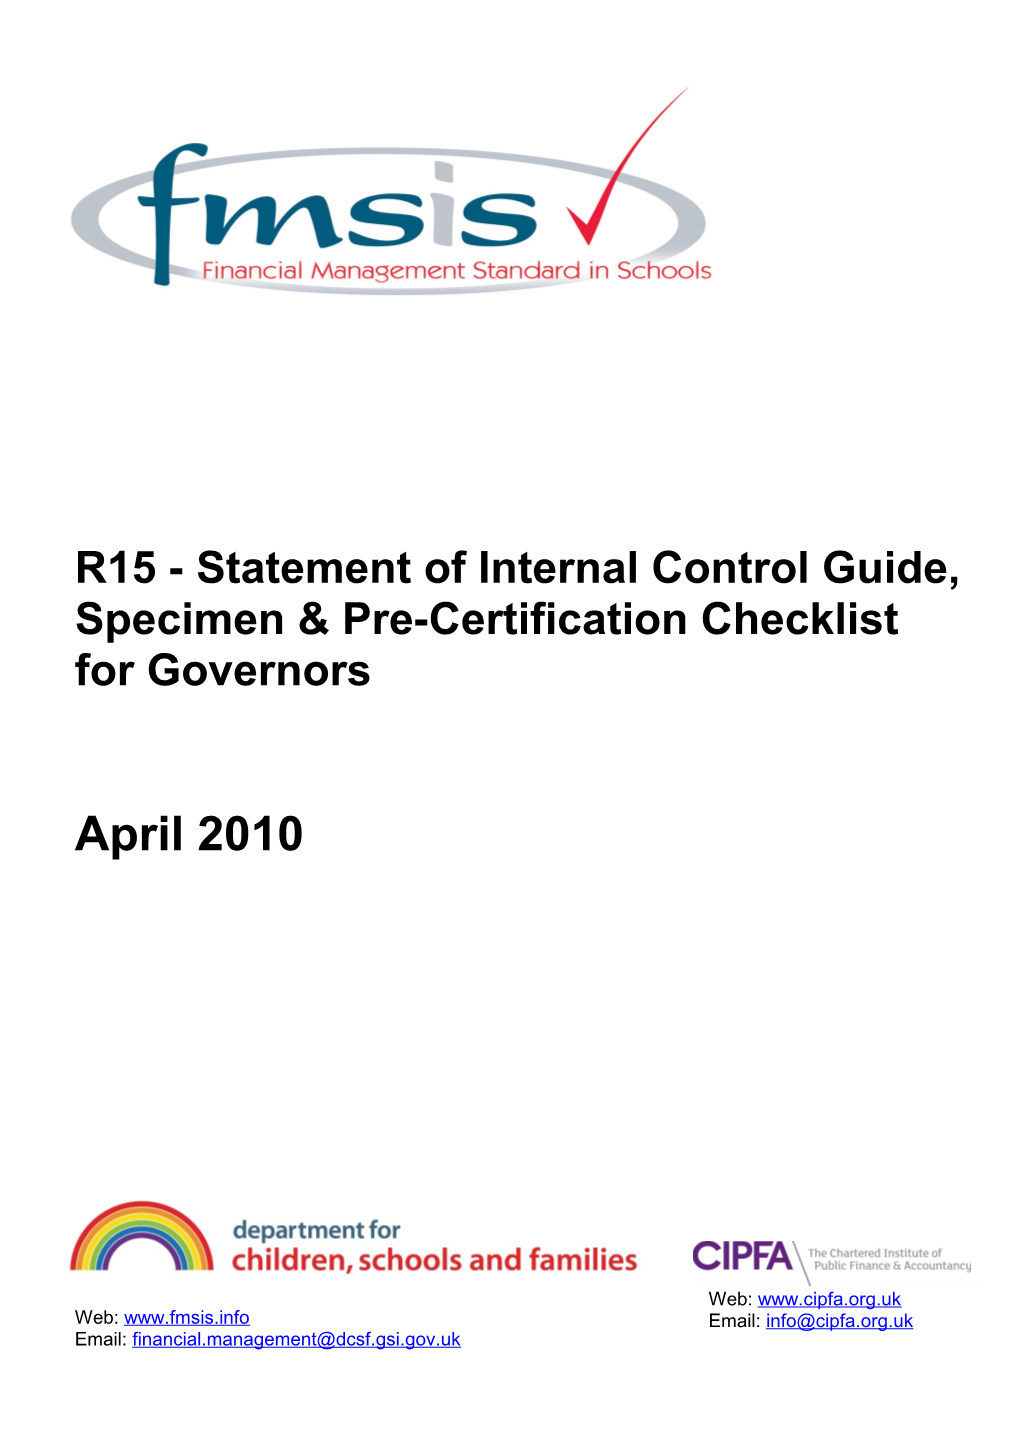 1.1Statements of Internal Control (SIC) Have Been Introduced in Large Sections of Both